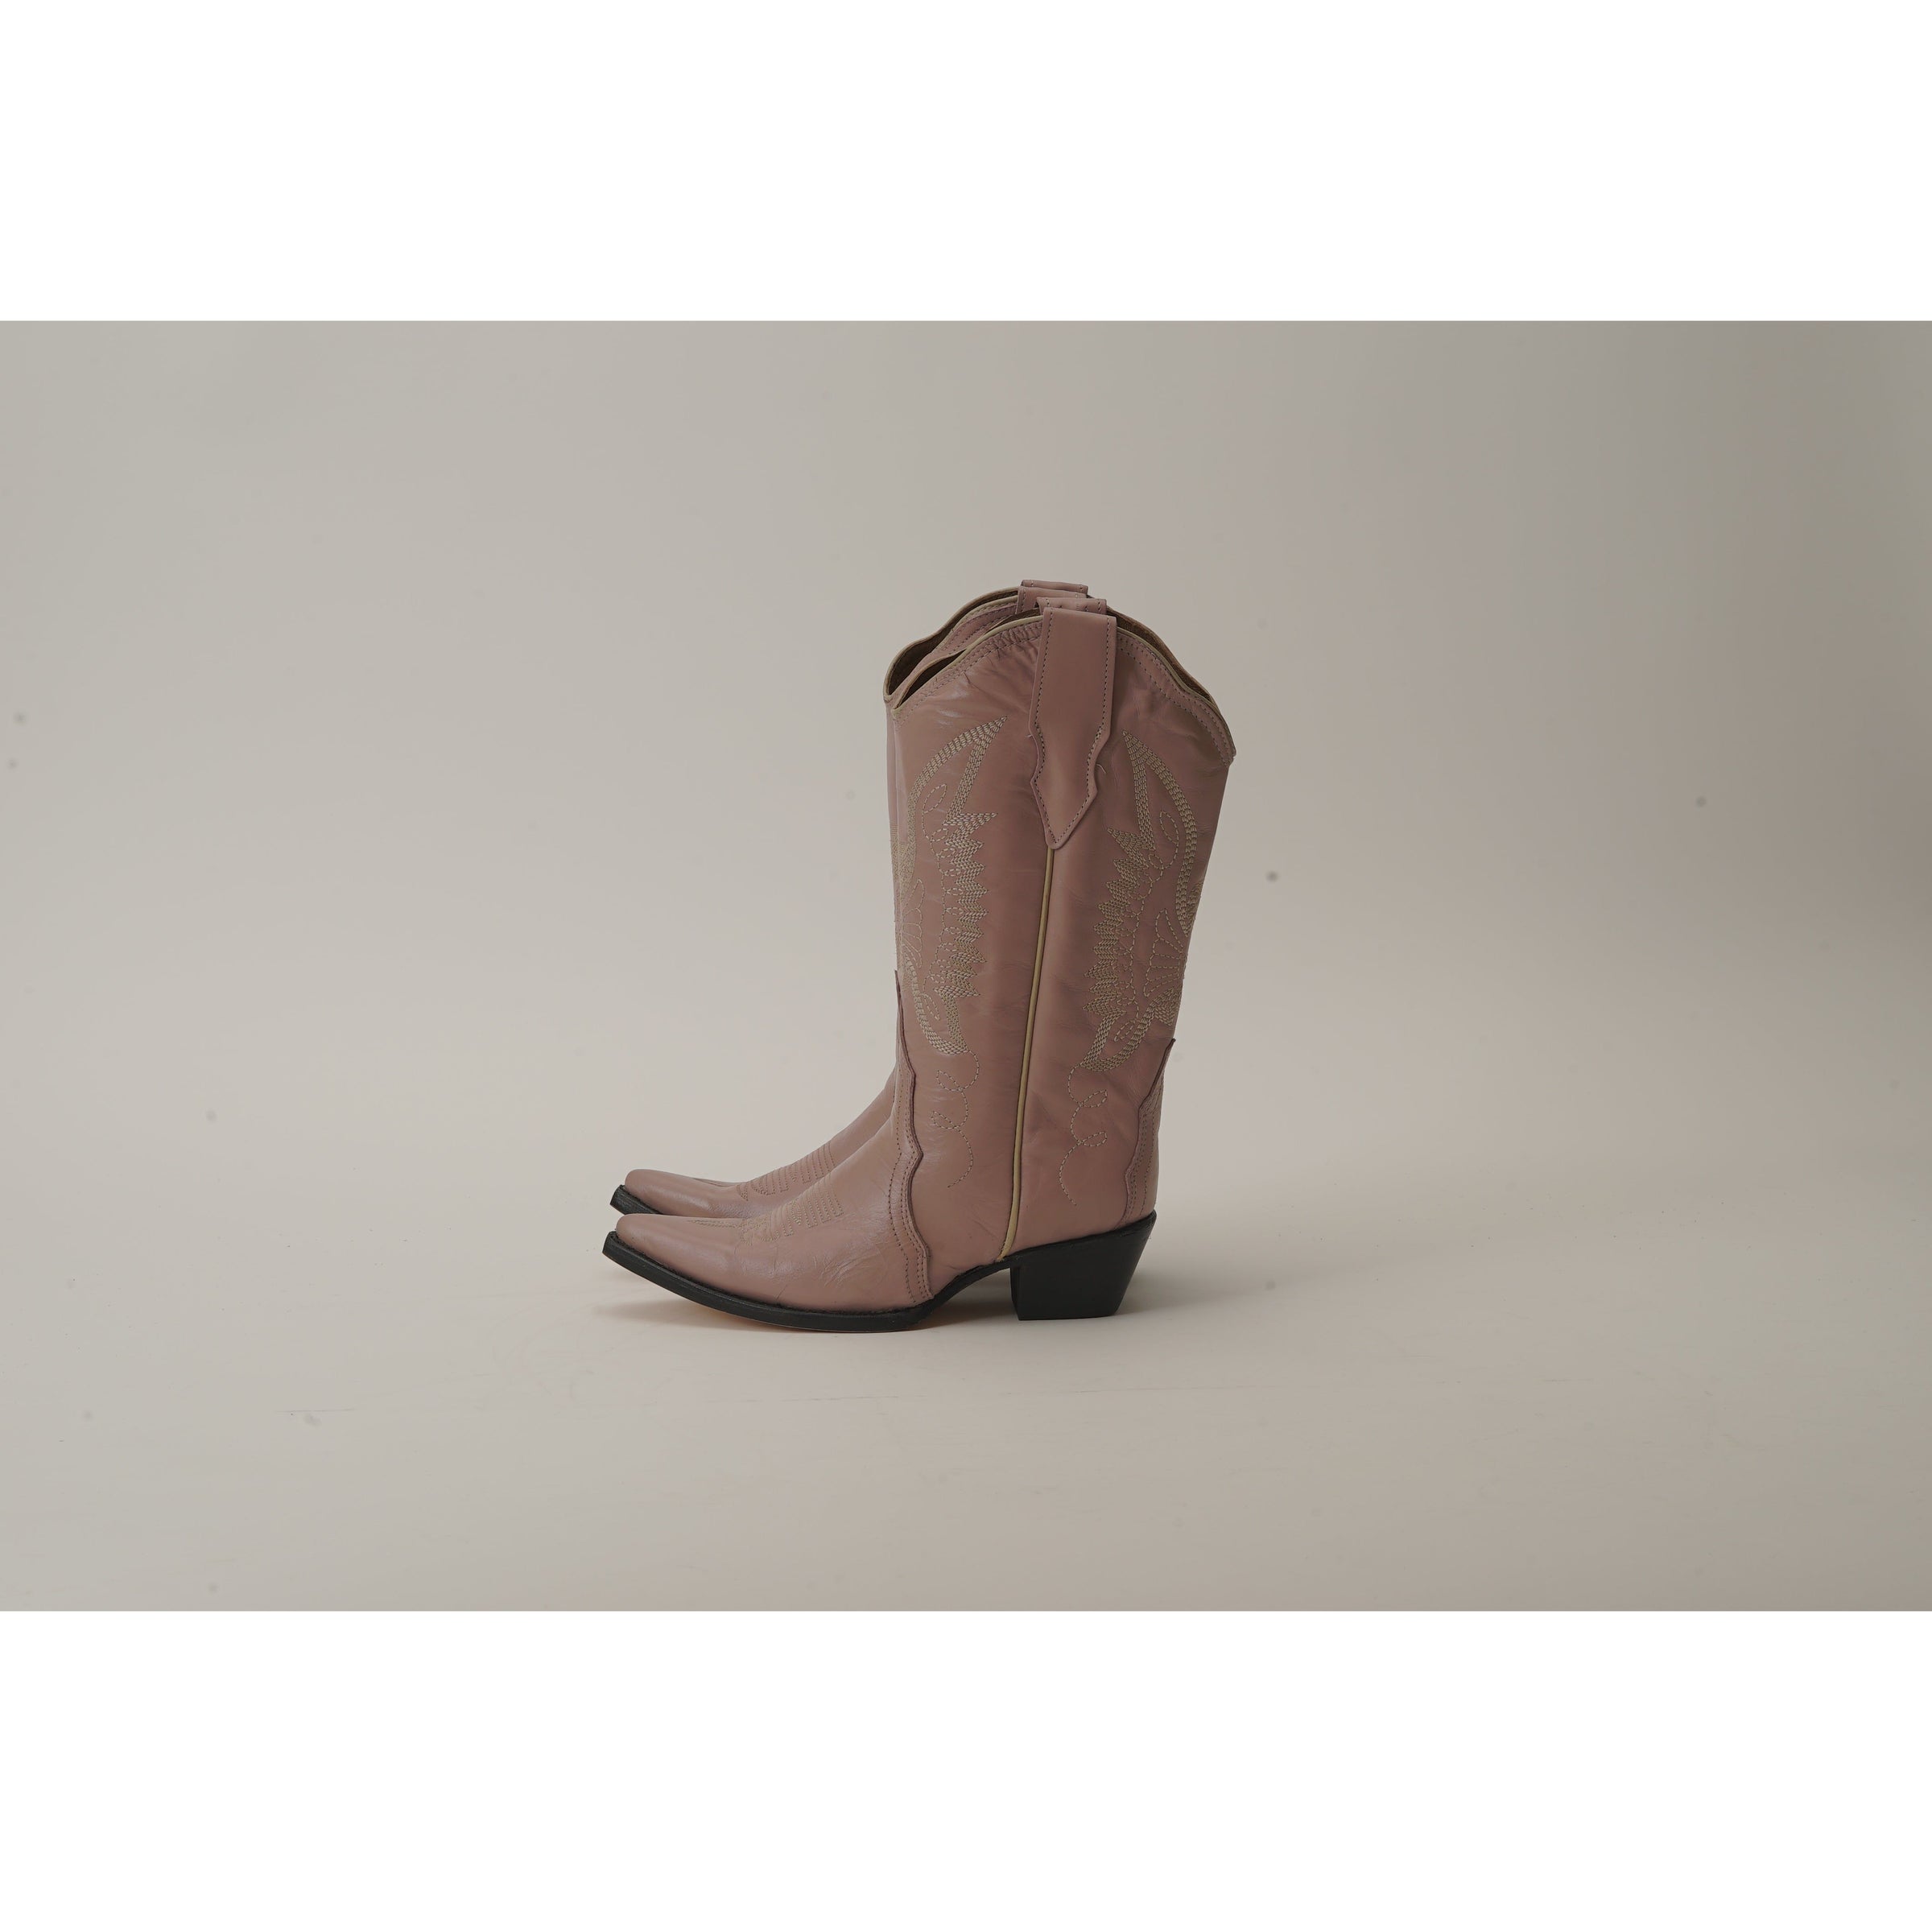 Dusty Rose Day Boots